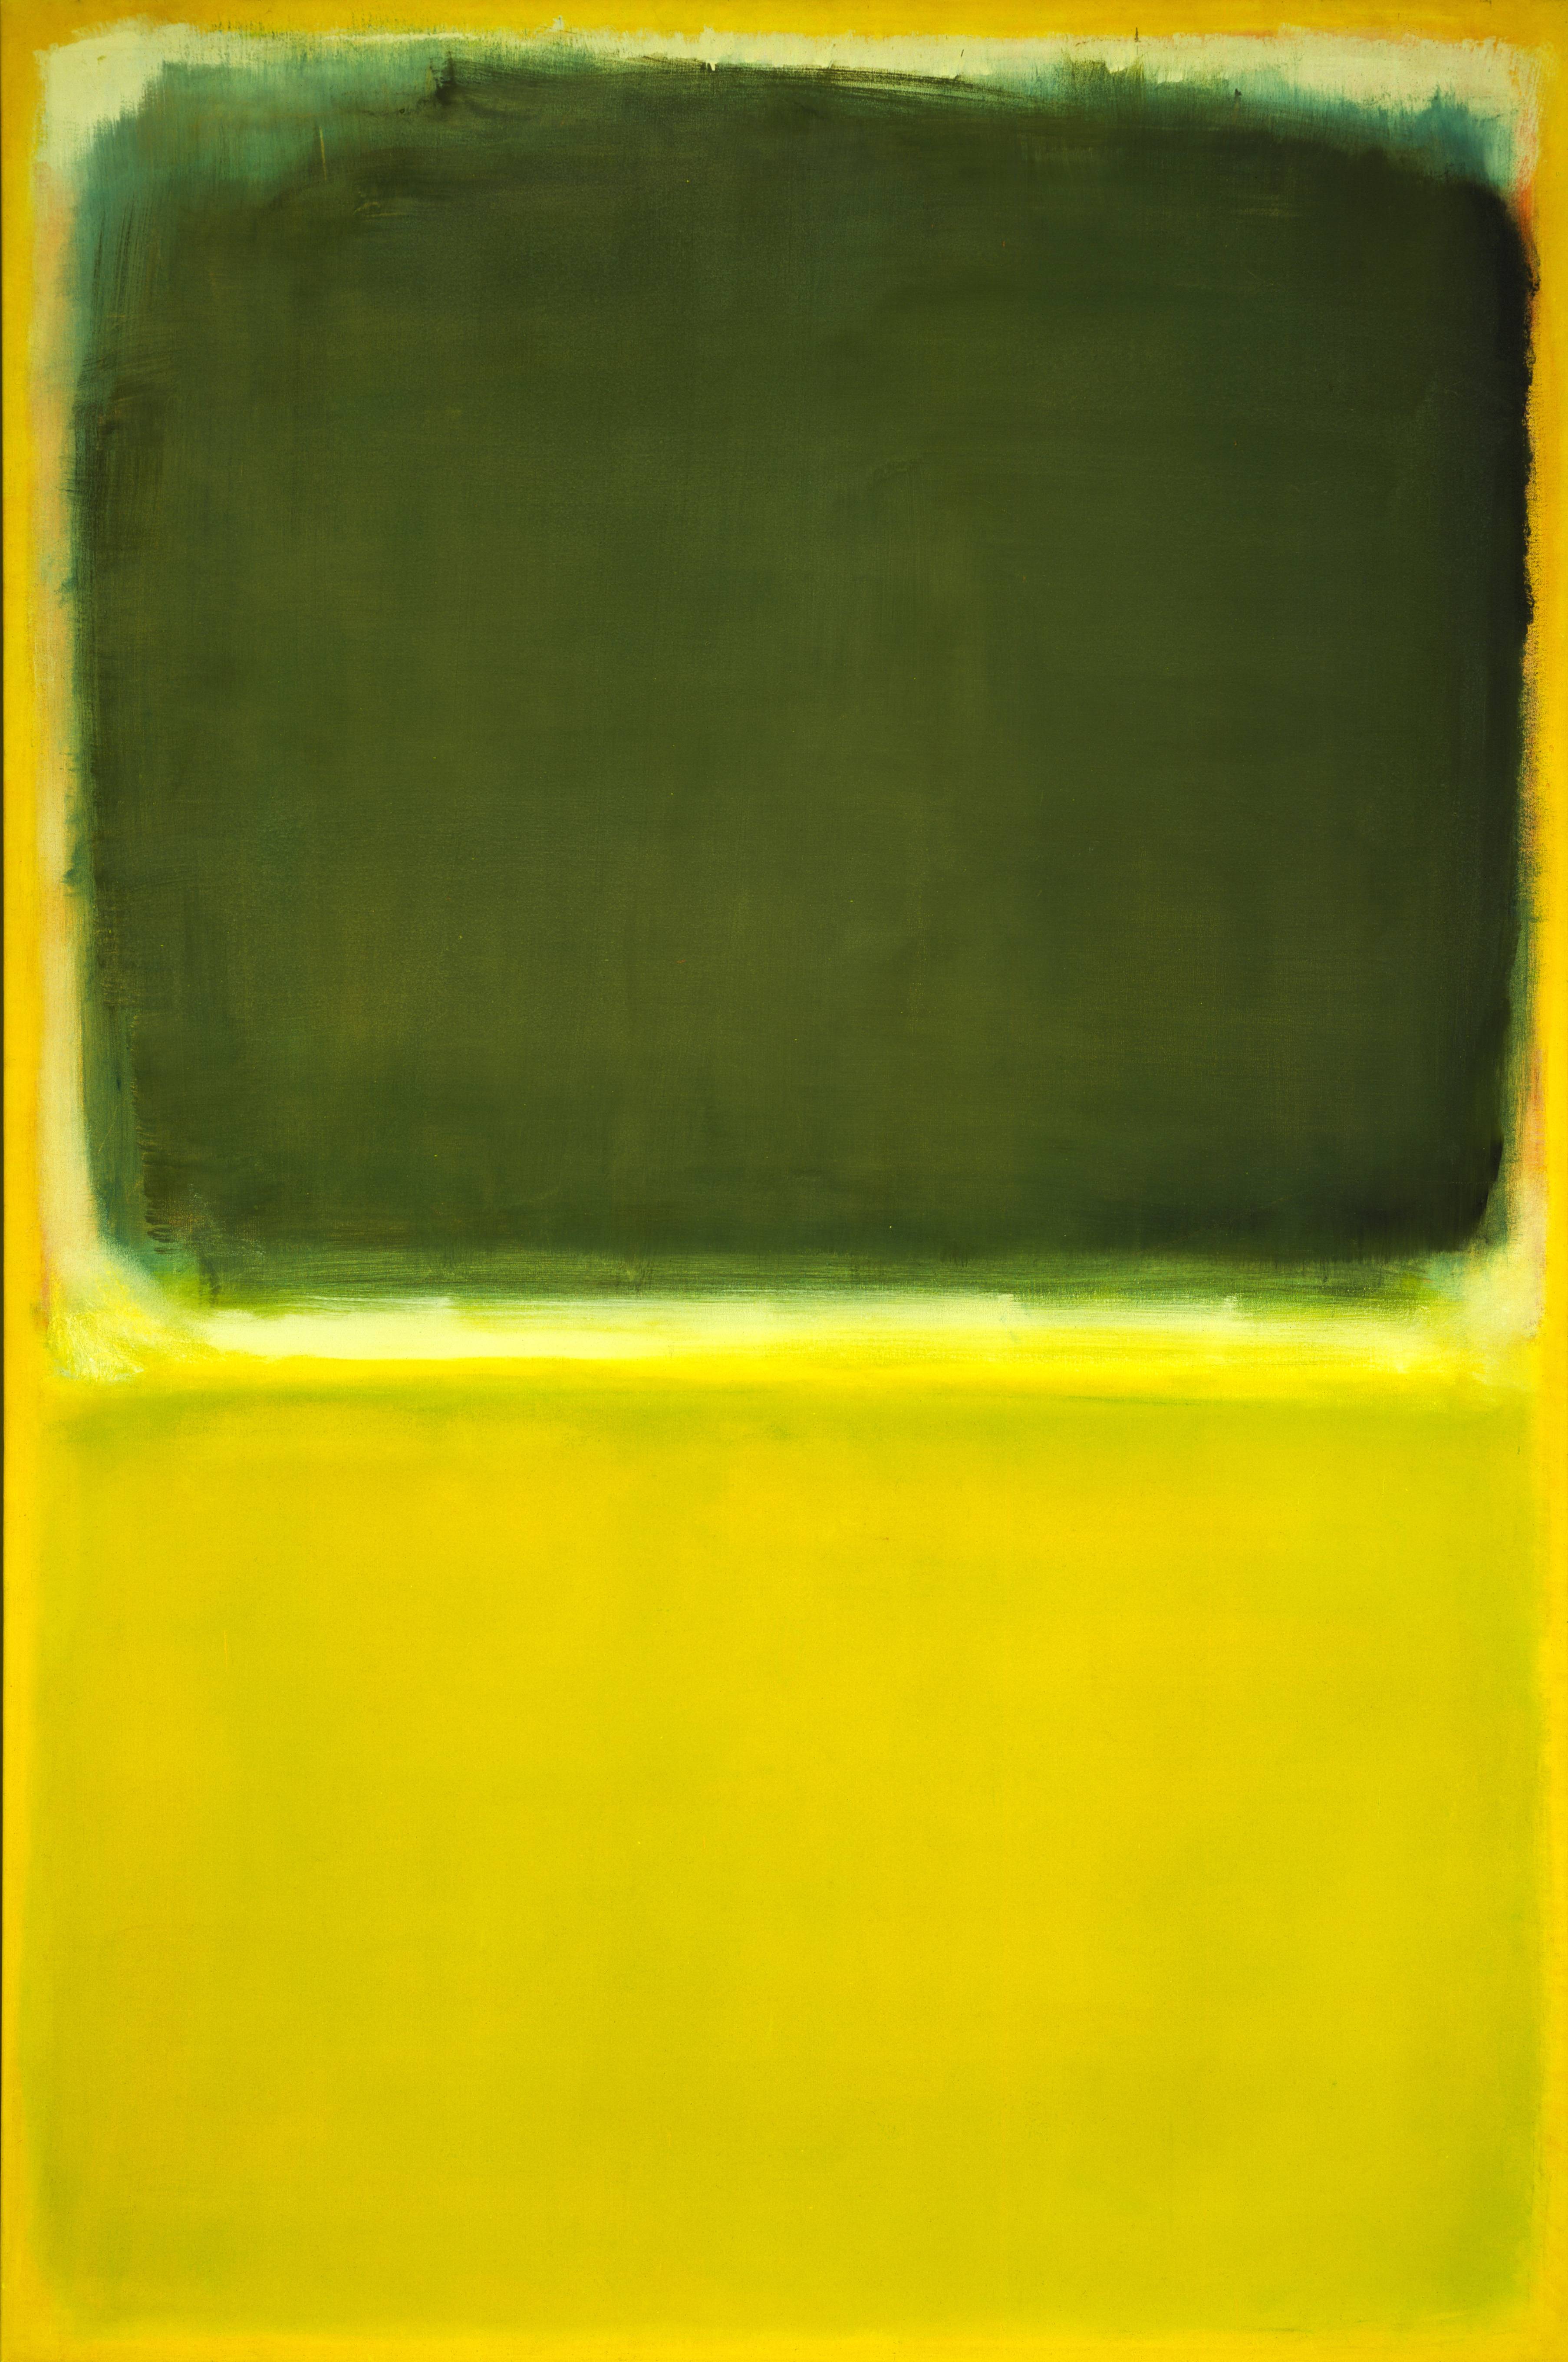 picture for Mark Rothko, Untitled, 1951, Oil on canvas, 67 ⅝ x 44 ⅝ inches, 5164.54, CR#462, Collection of Christopher Rothko, Copyright ©1998 by Kate Rothko Prizel and Christopher Rothko.